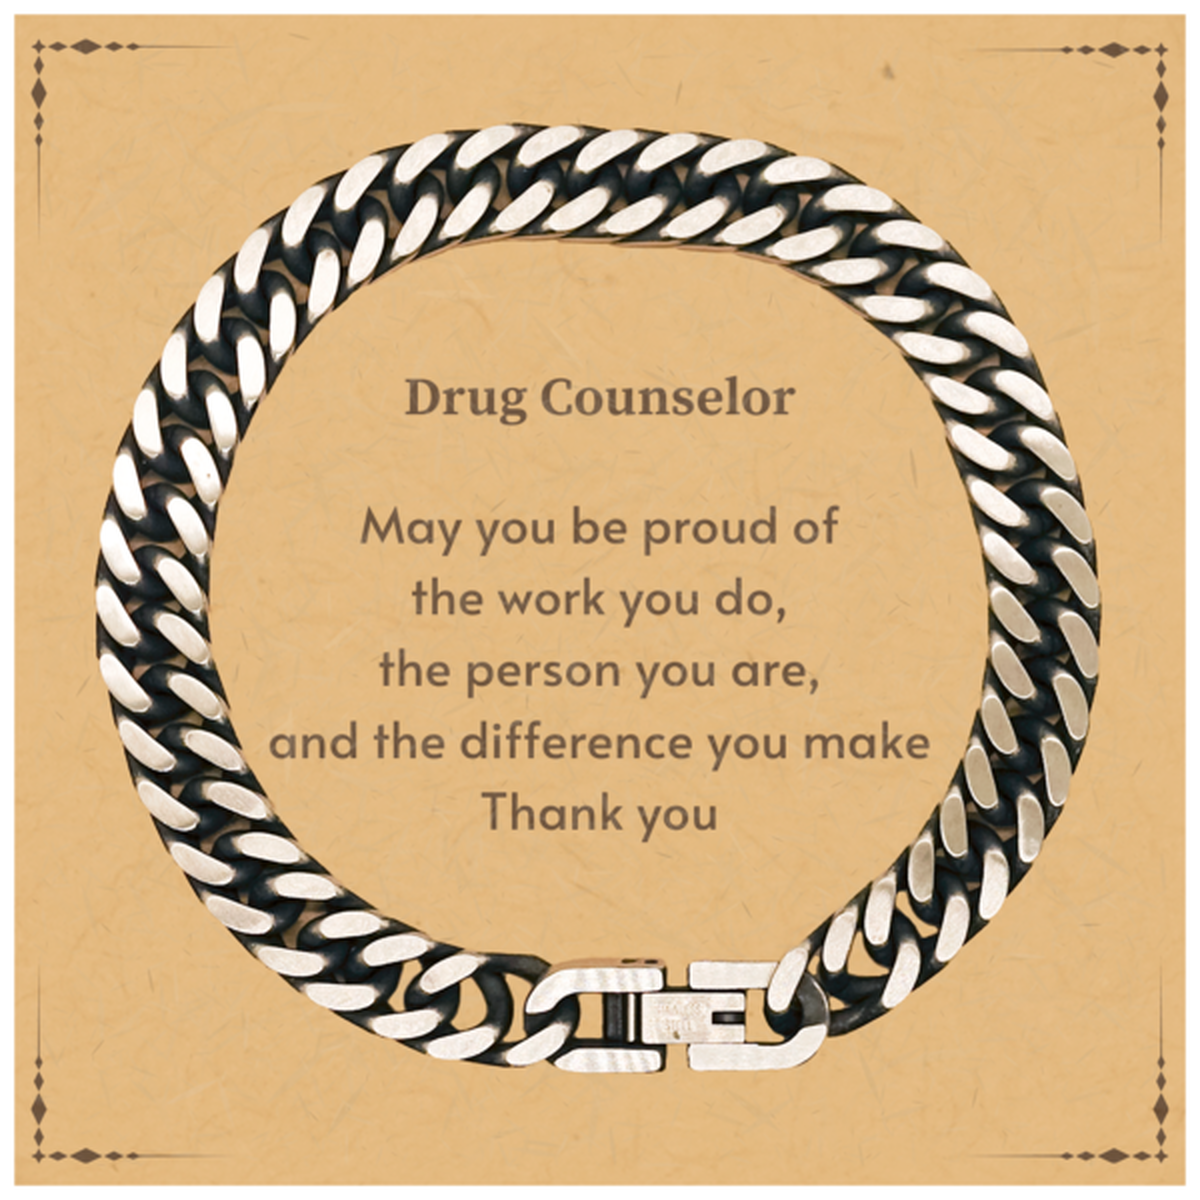 Heartwarming Cuban Link Chain Bracelet Retirement Coworkers Gifts for Drug Counselor, Drug Counselor May You be proud of the work you do, the person you are Gifts for Boss Men Women Friends